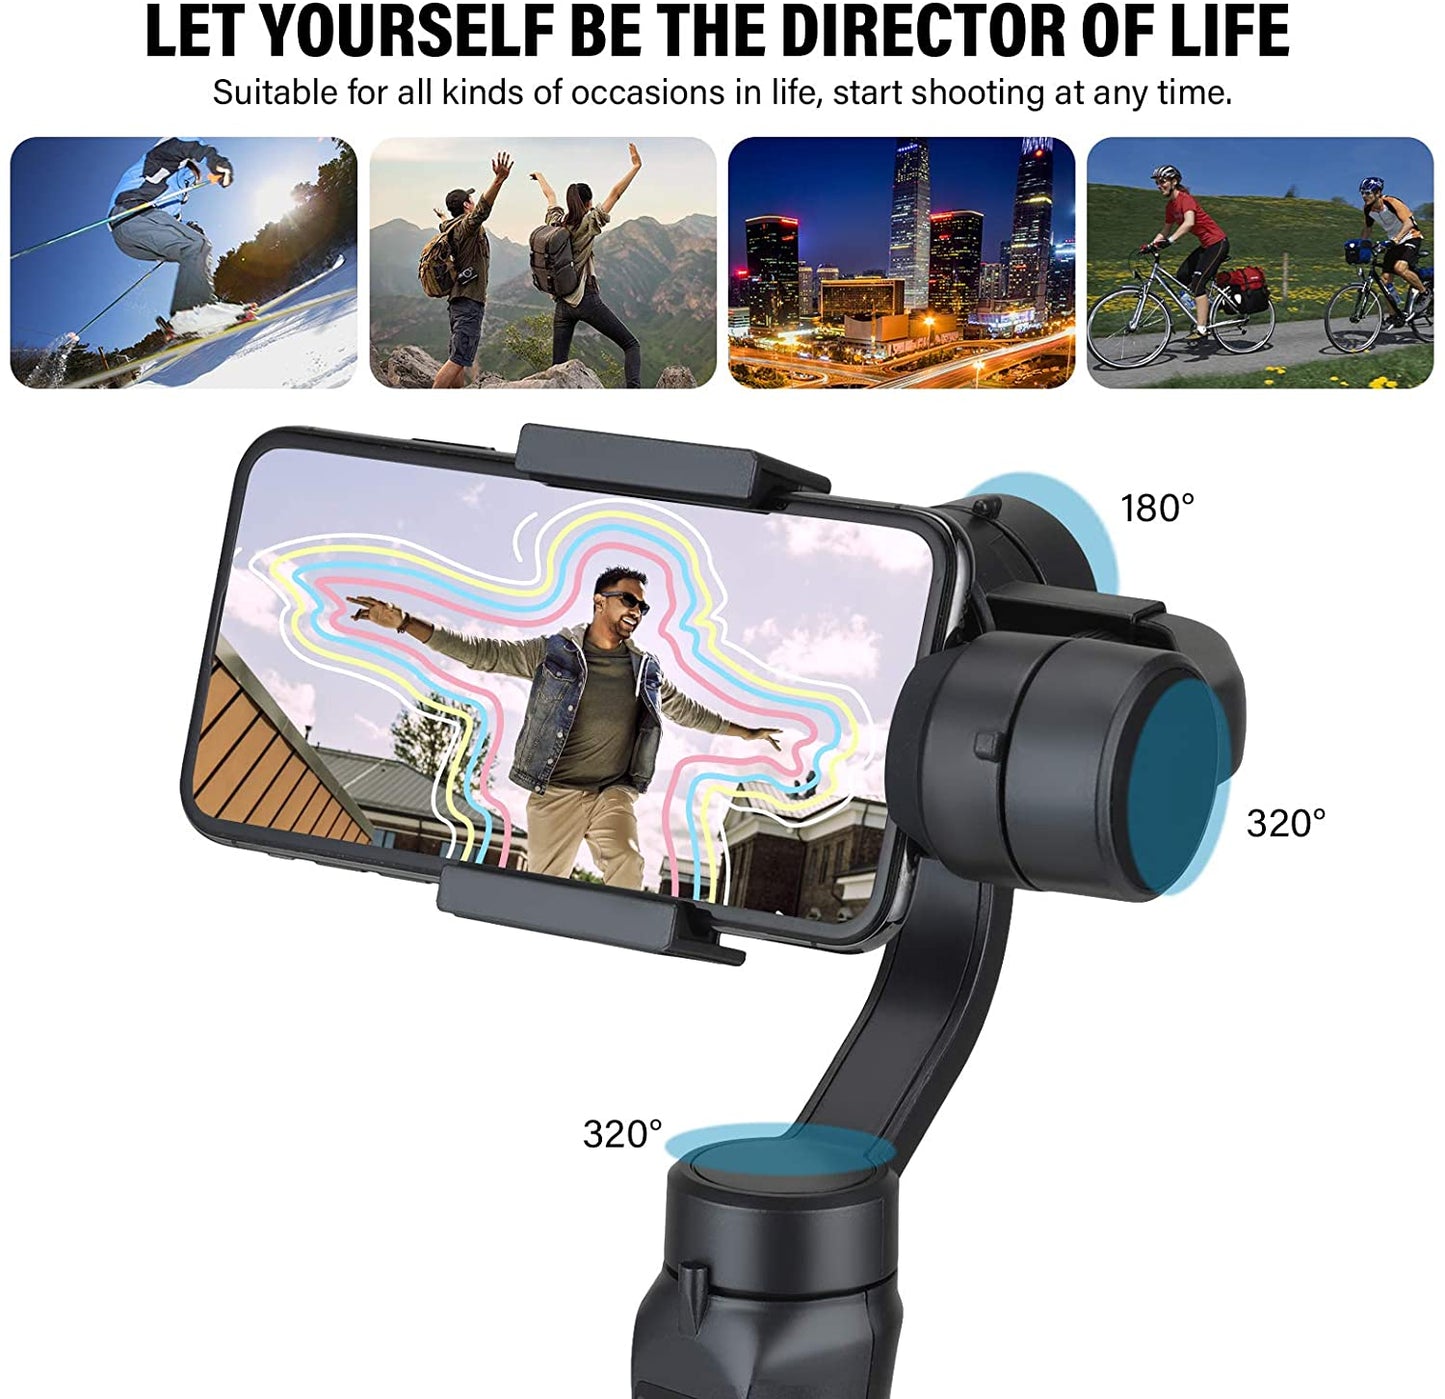 F6 3 Axis Gimbal Handheld Stabilizer Cellphone Action Camera Holder Anti Shake Video Record Smartphone Gimbal For Xiaomi iPhone